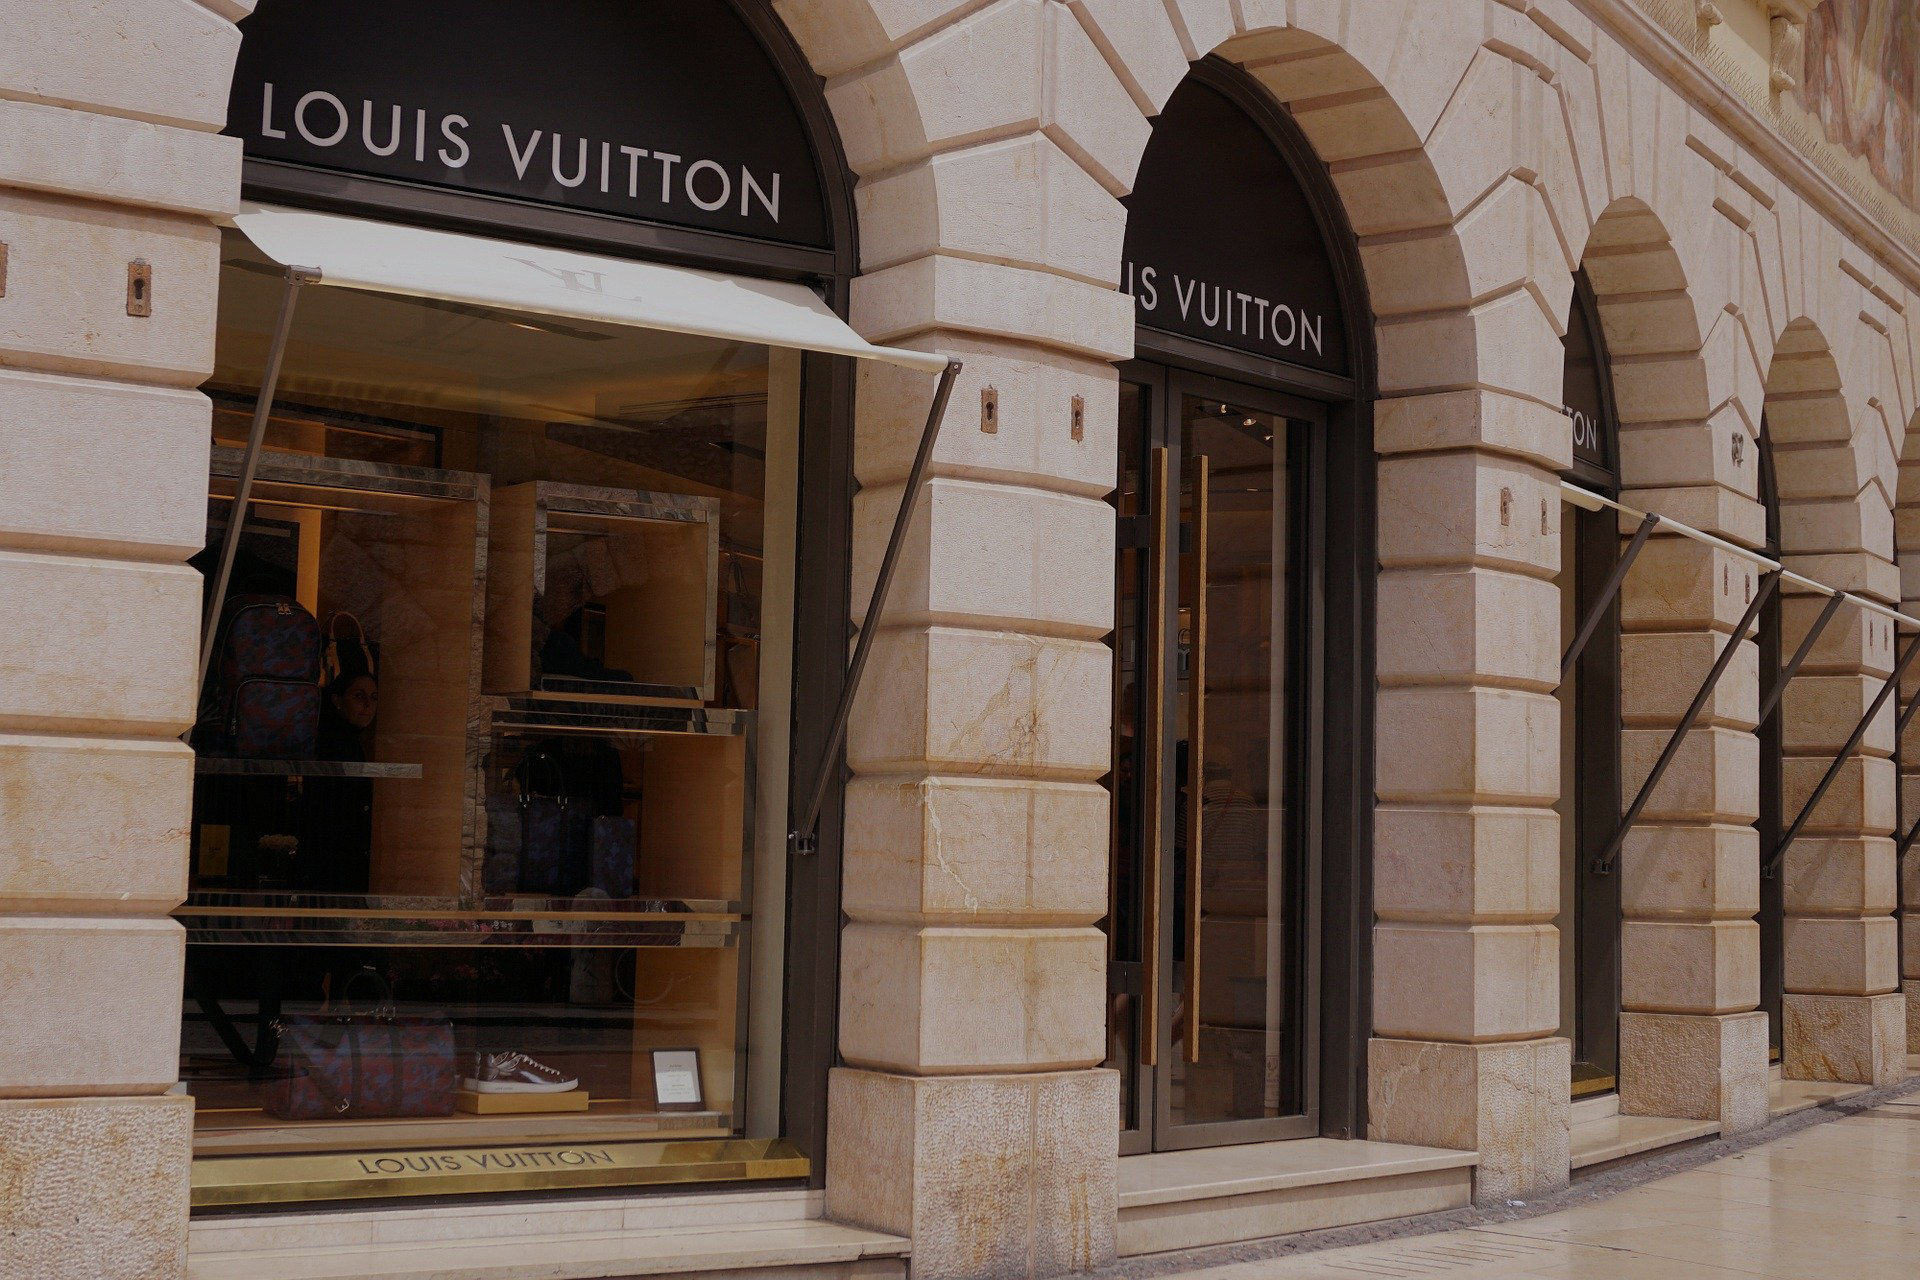 Louis Vuitton’s new collection